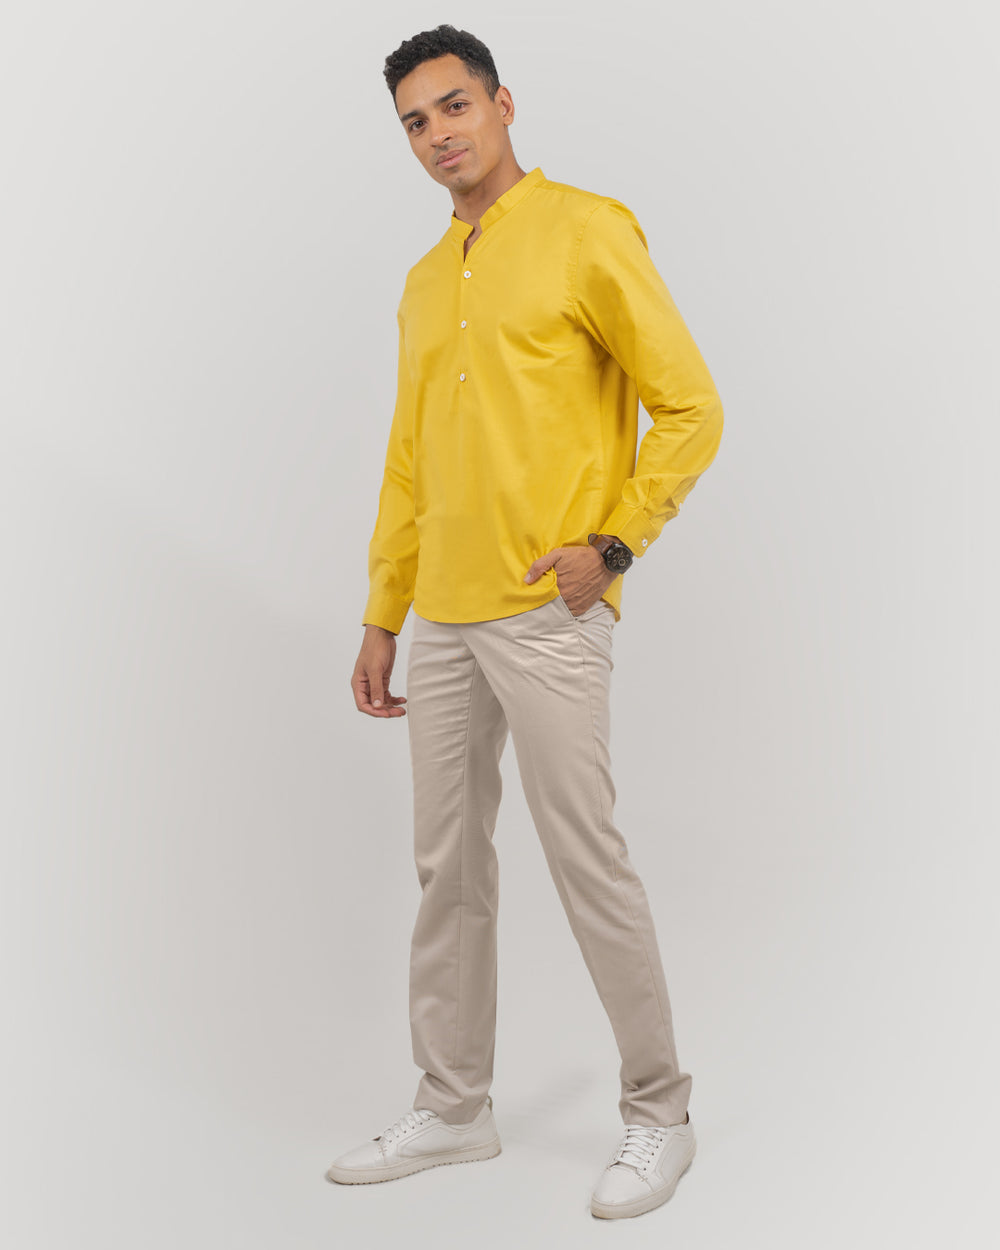 Comfortable traditional yellow short kurta for men, ideal for casual and festive wear.